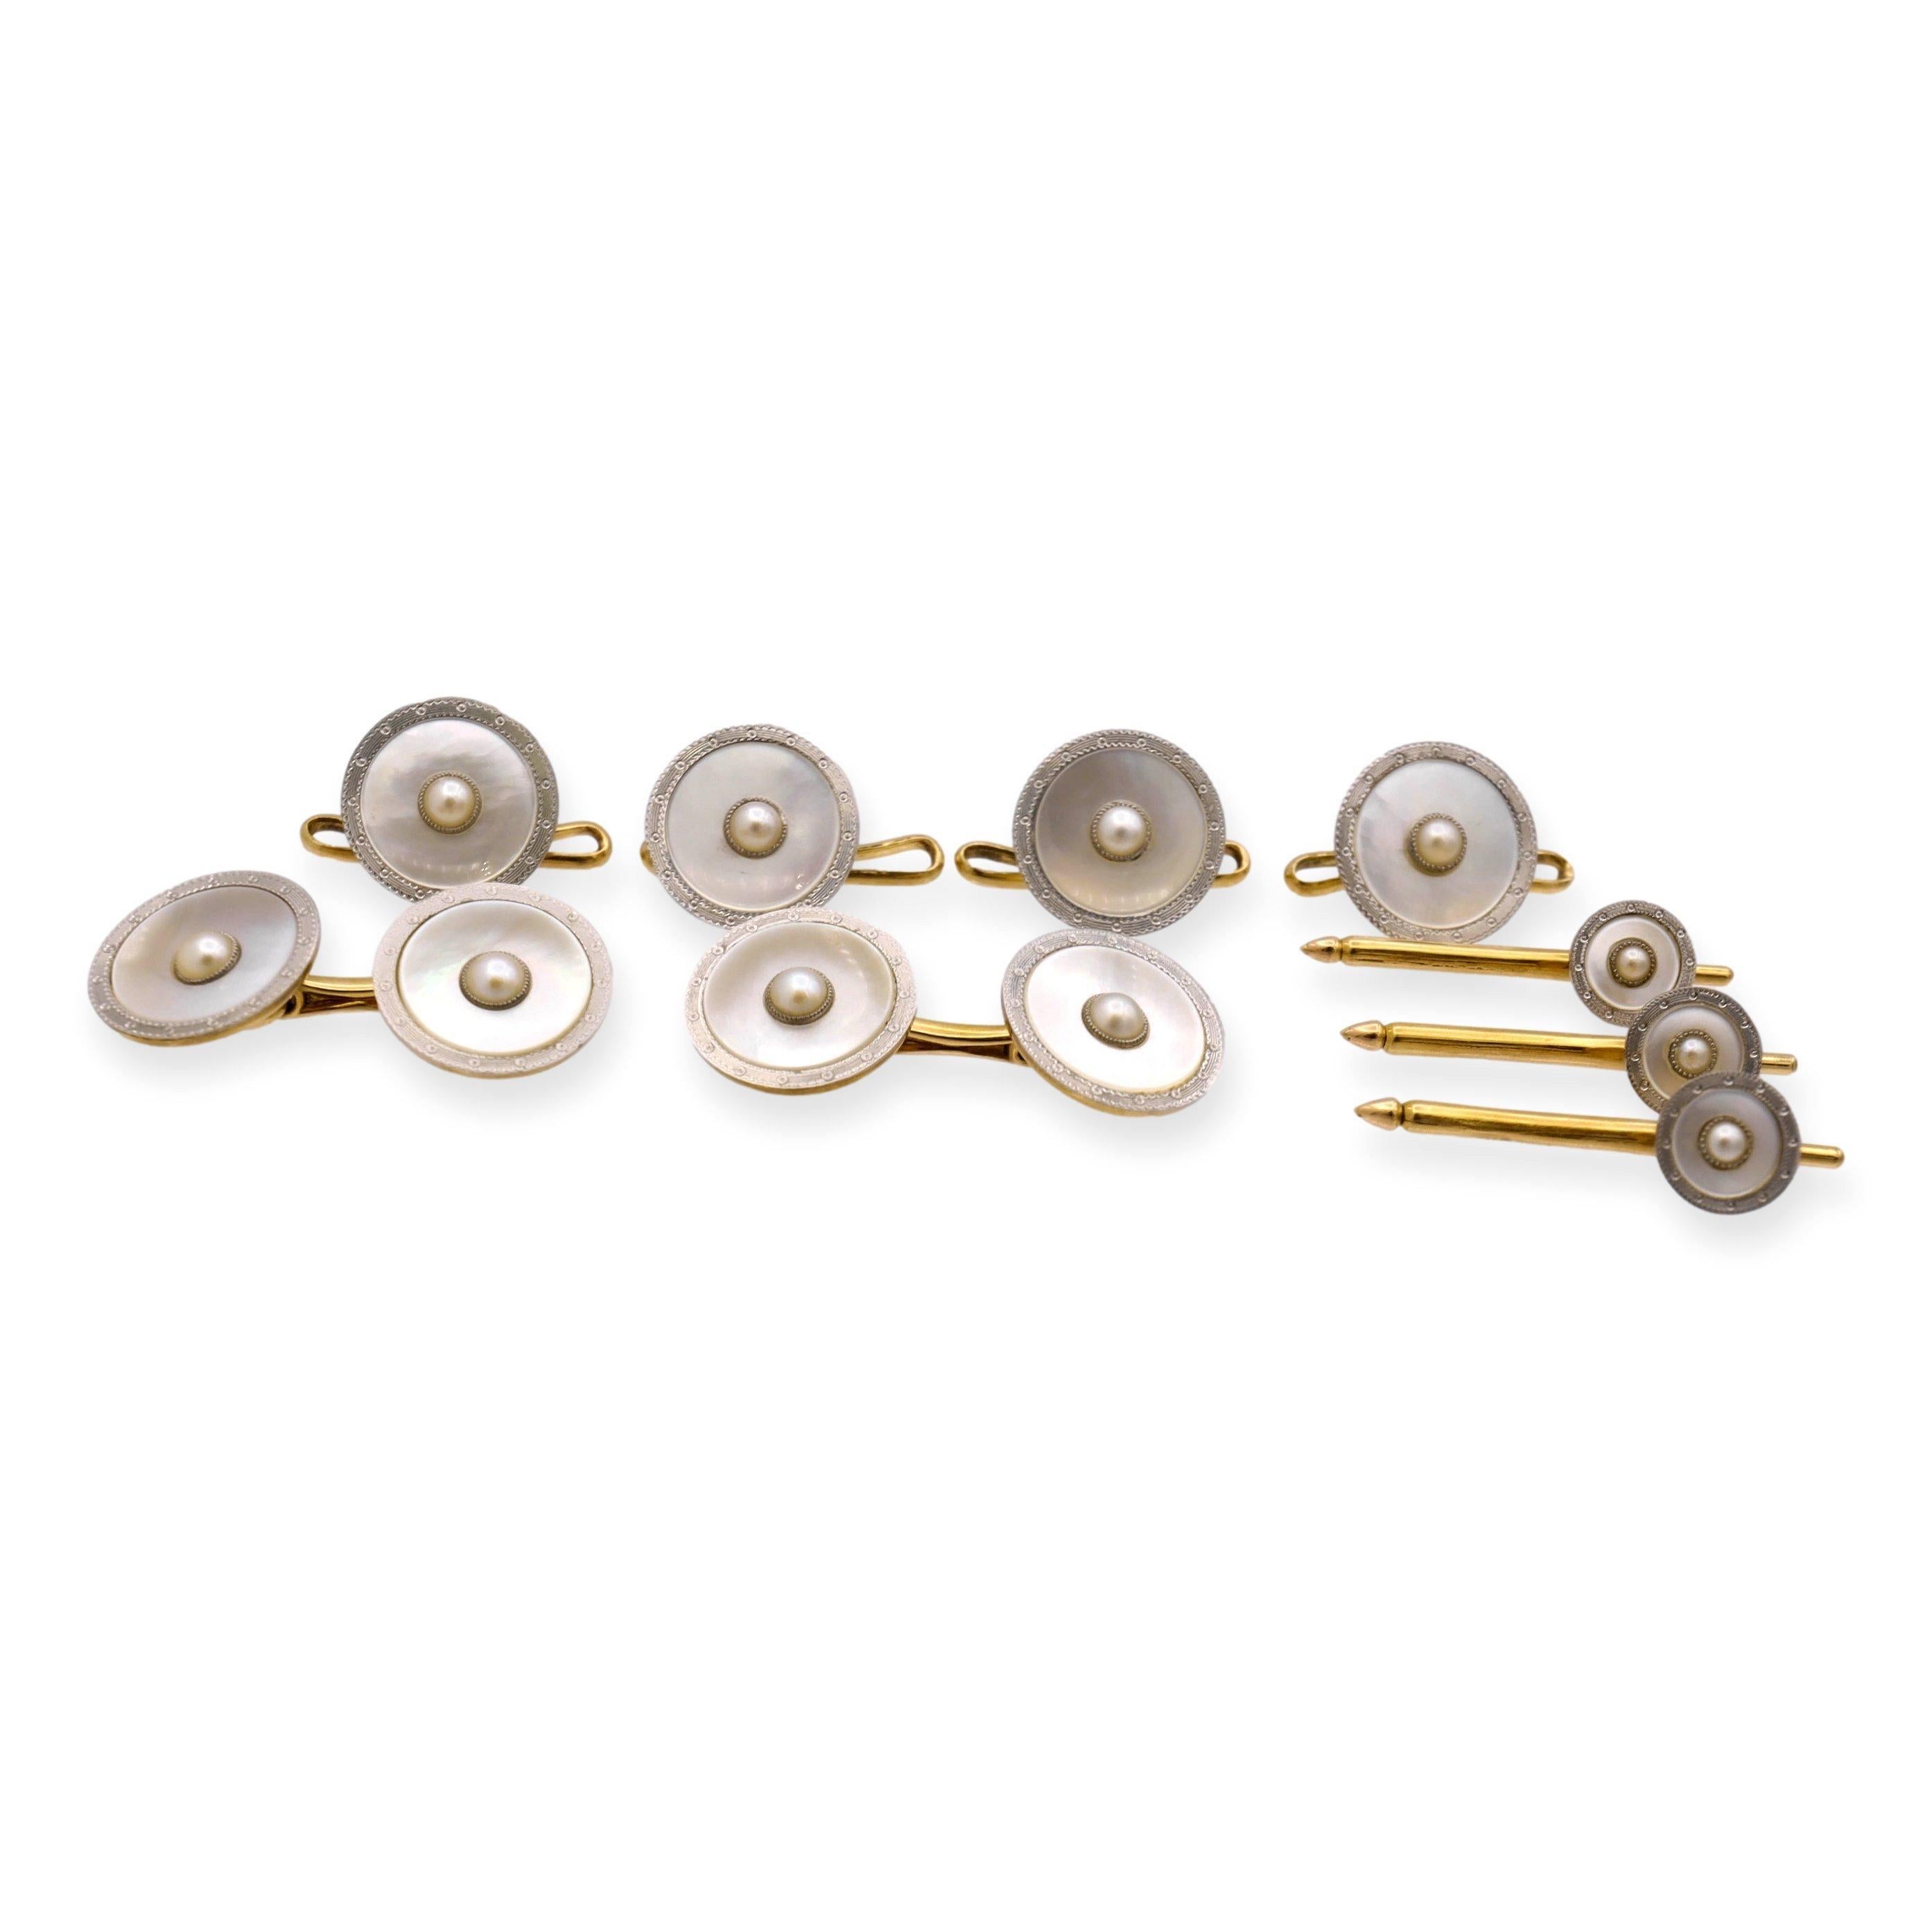 Set of dress cufflinks from the Art-Deco era , designed by the prestigious jewelry firm Carrington & Co in the early 20th century. The set features a combination of precious materials, including pearls crafted in high-quality platinum on top of 14